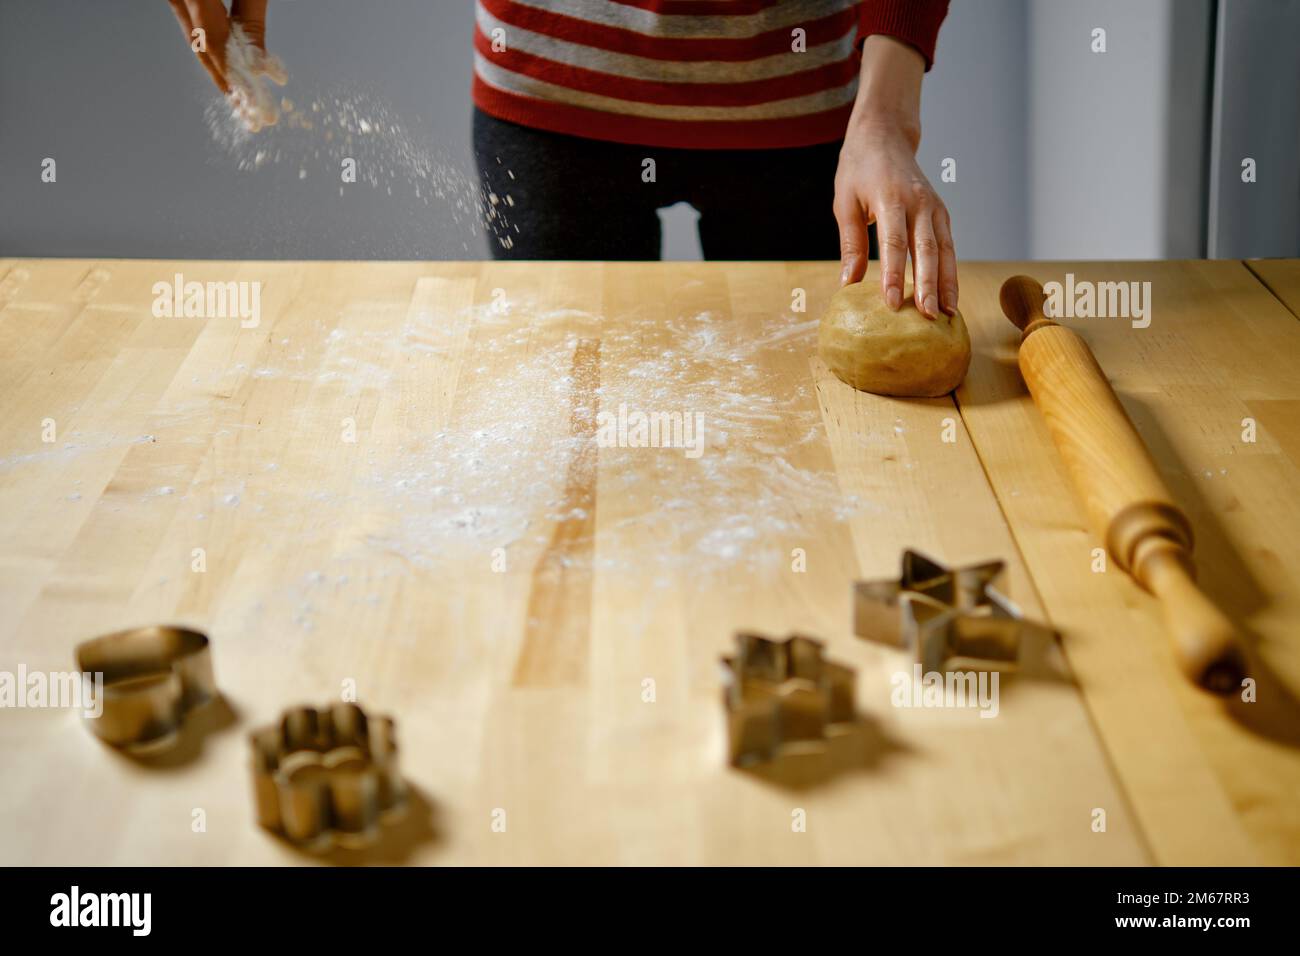 Unrecognizable woman sprinkles flour on table to roll out dough Stock Photo